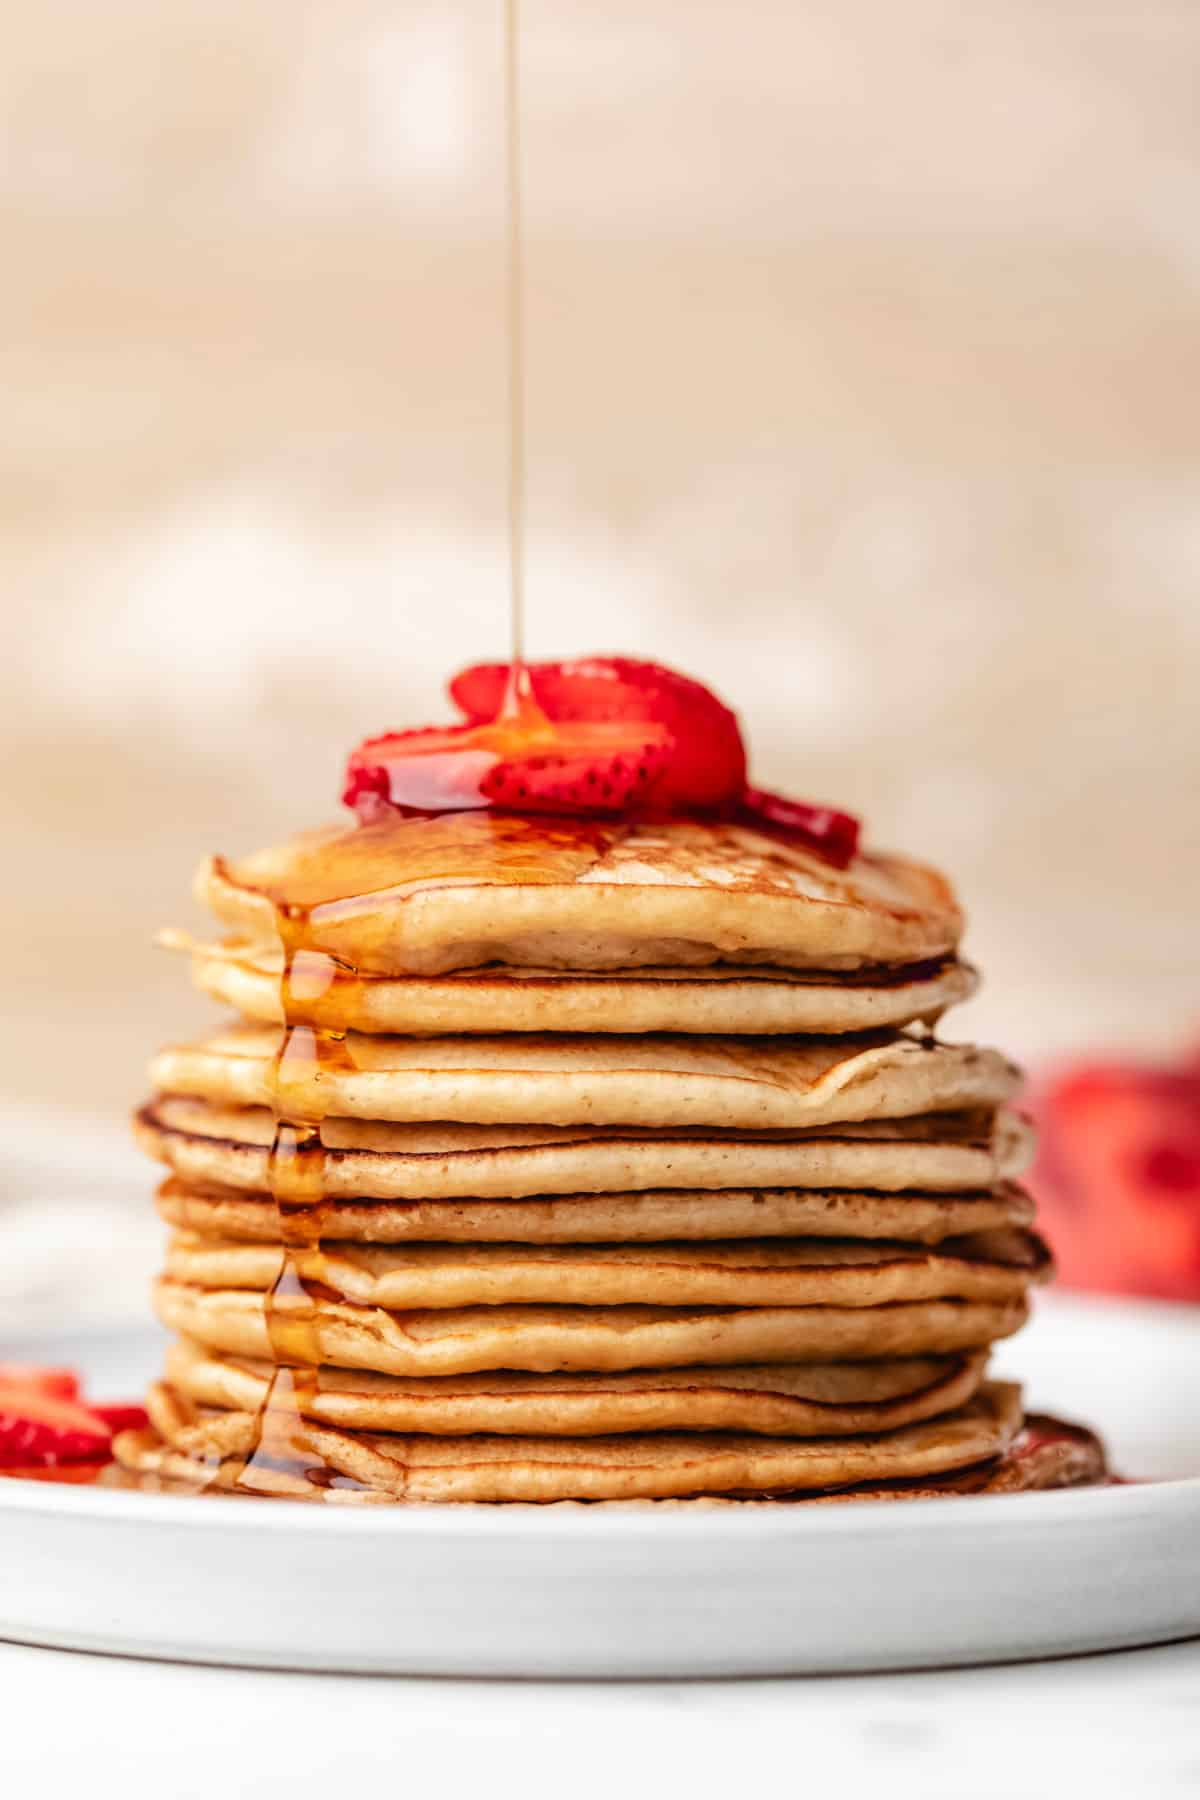 Maple syrup pouring onto a stack of oatmeal pancakes.